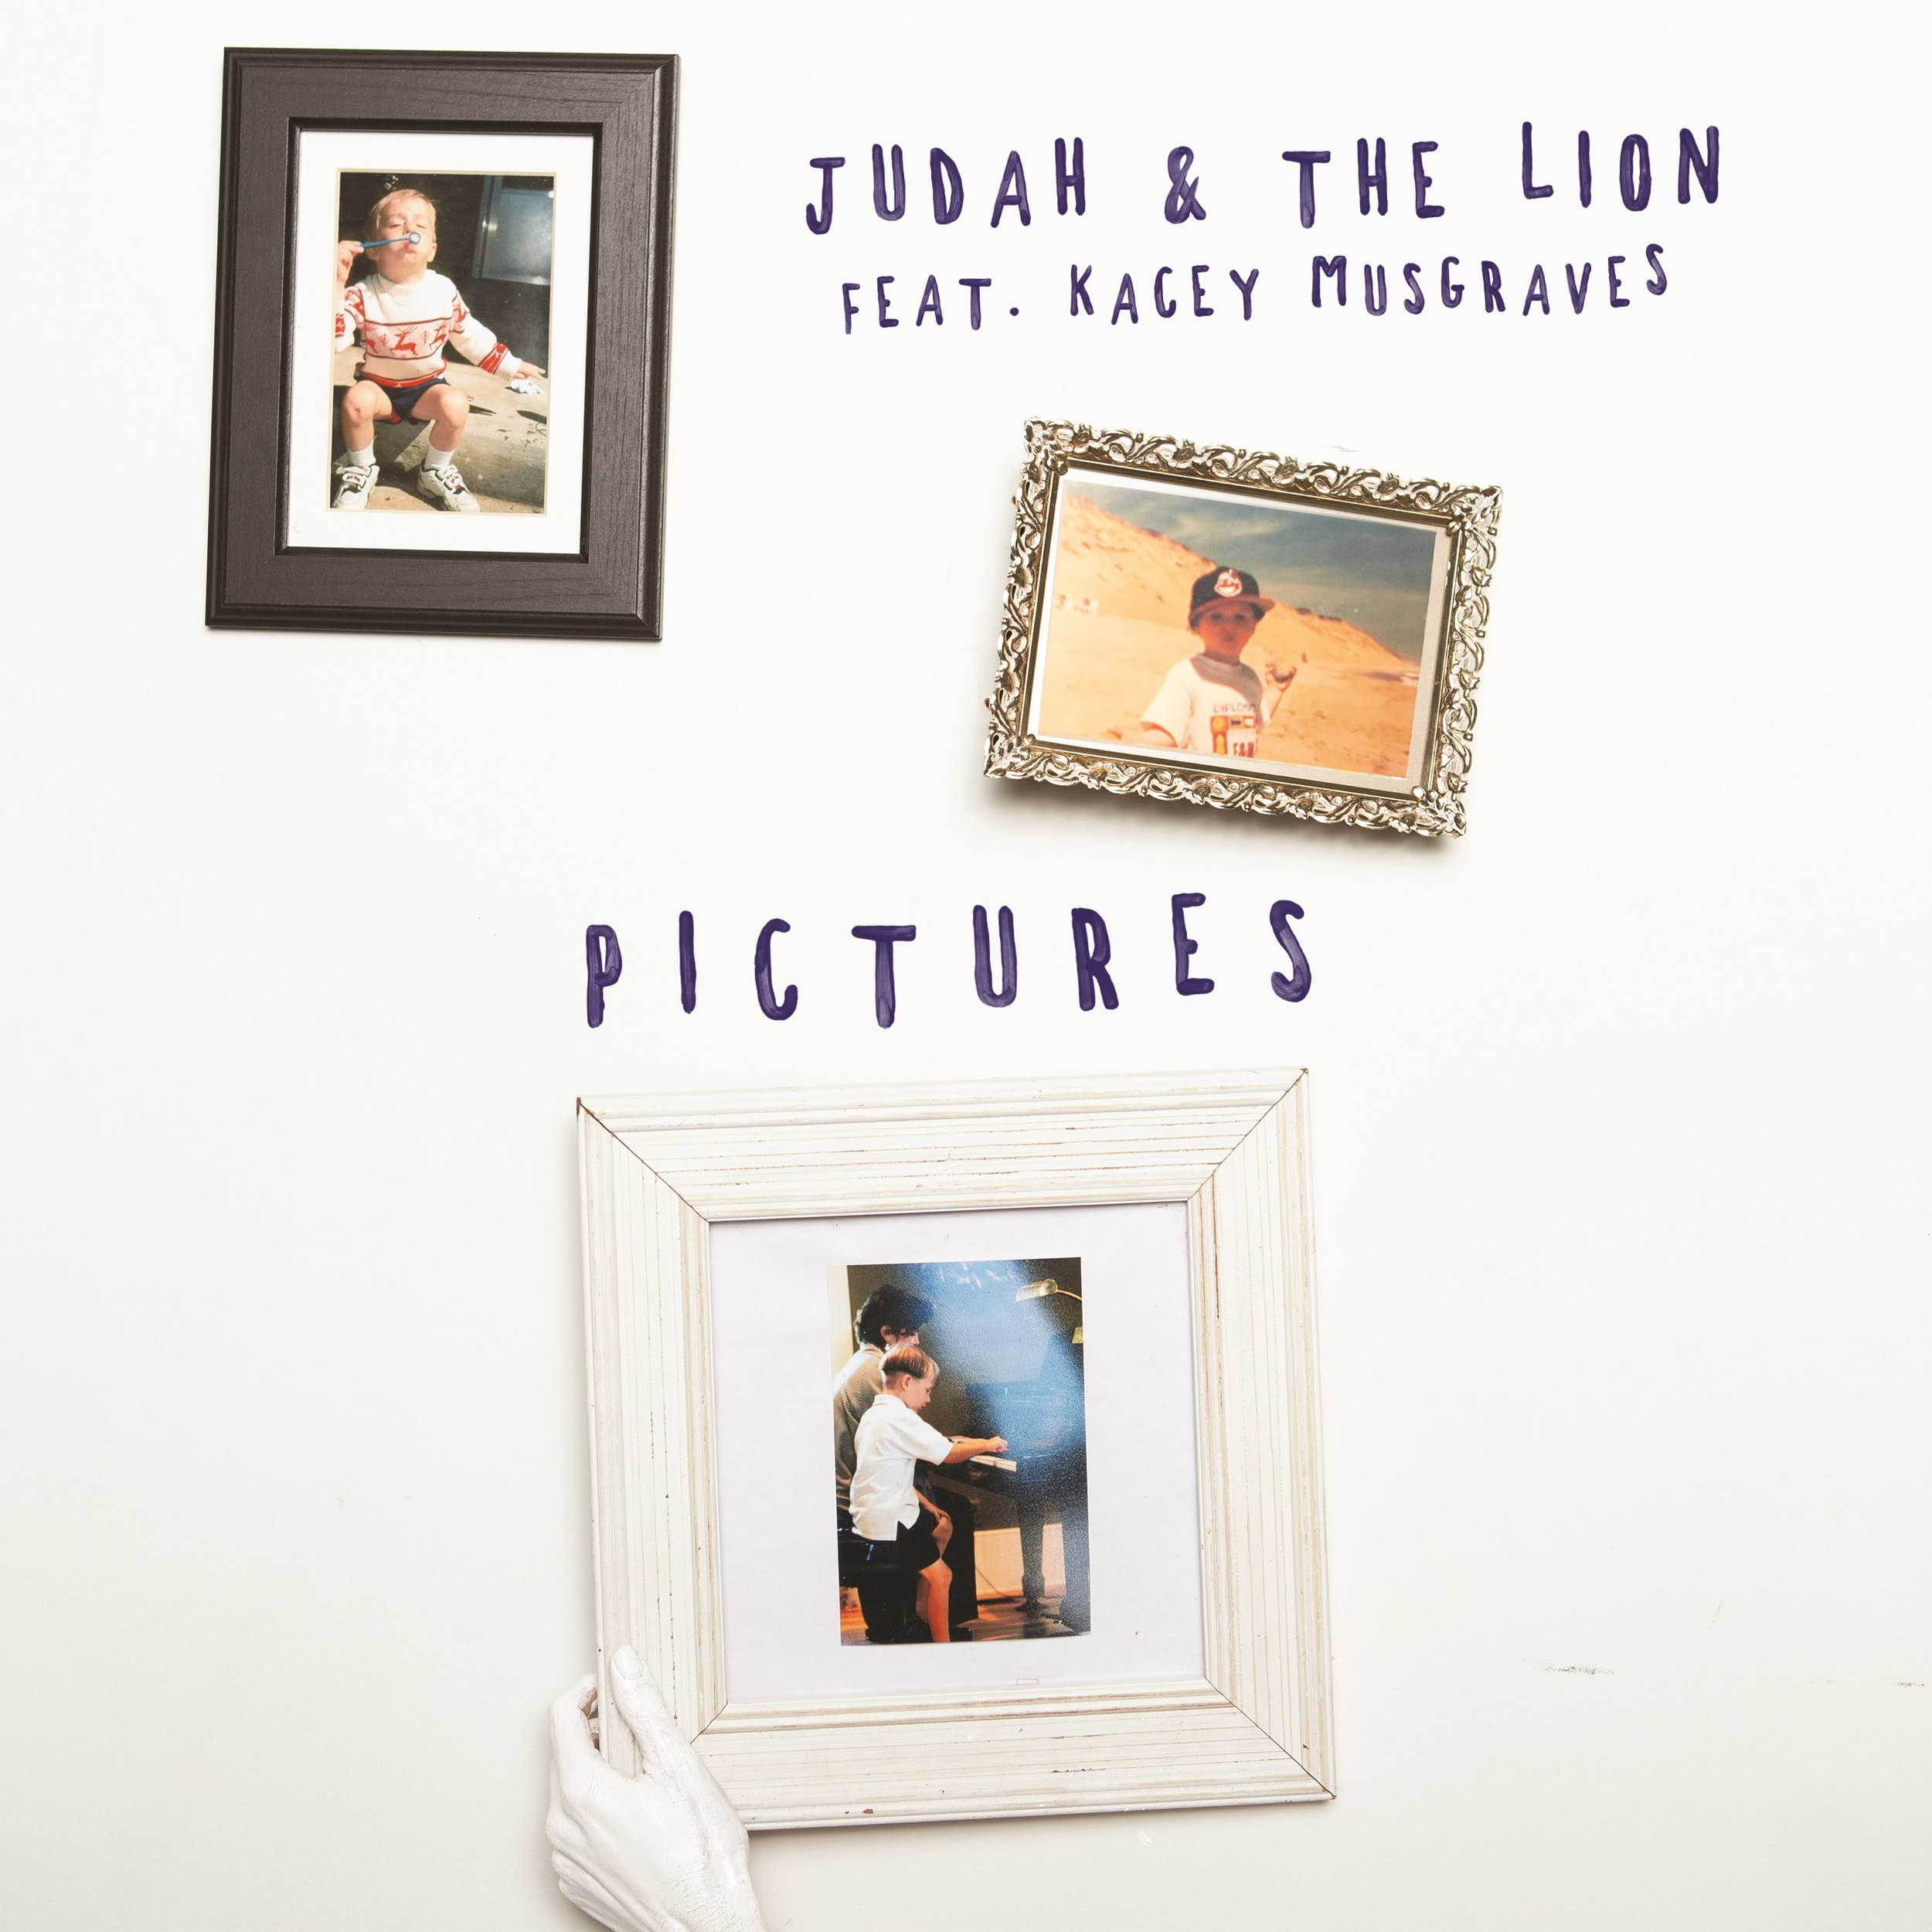 Judah-&-the-Lion-pictures-Kacey-Musgraves.jpg